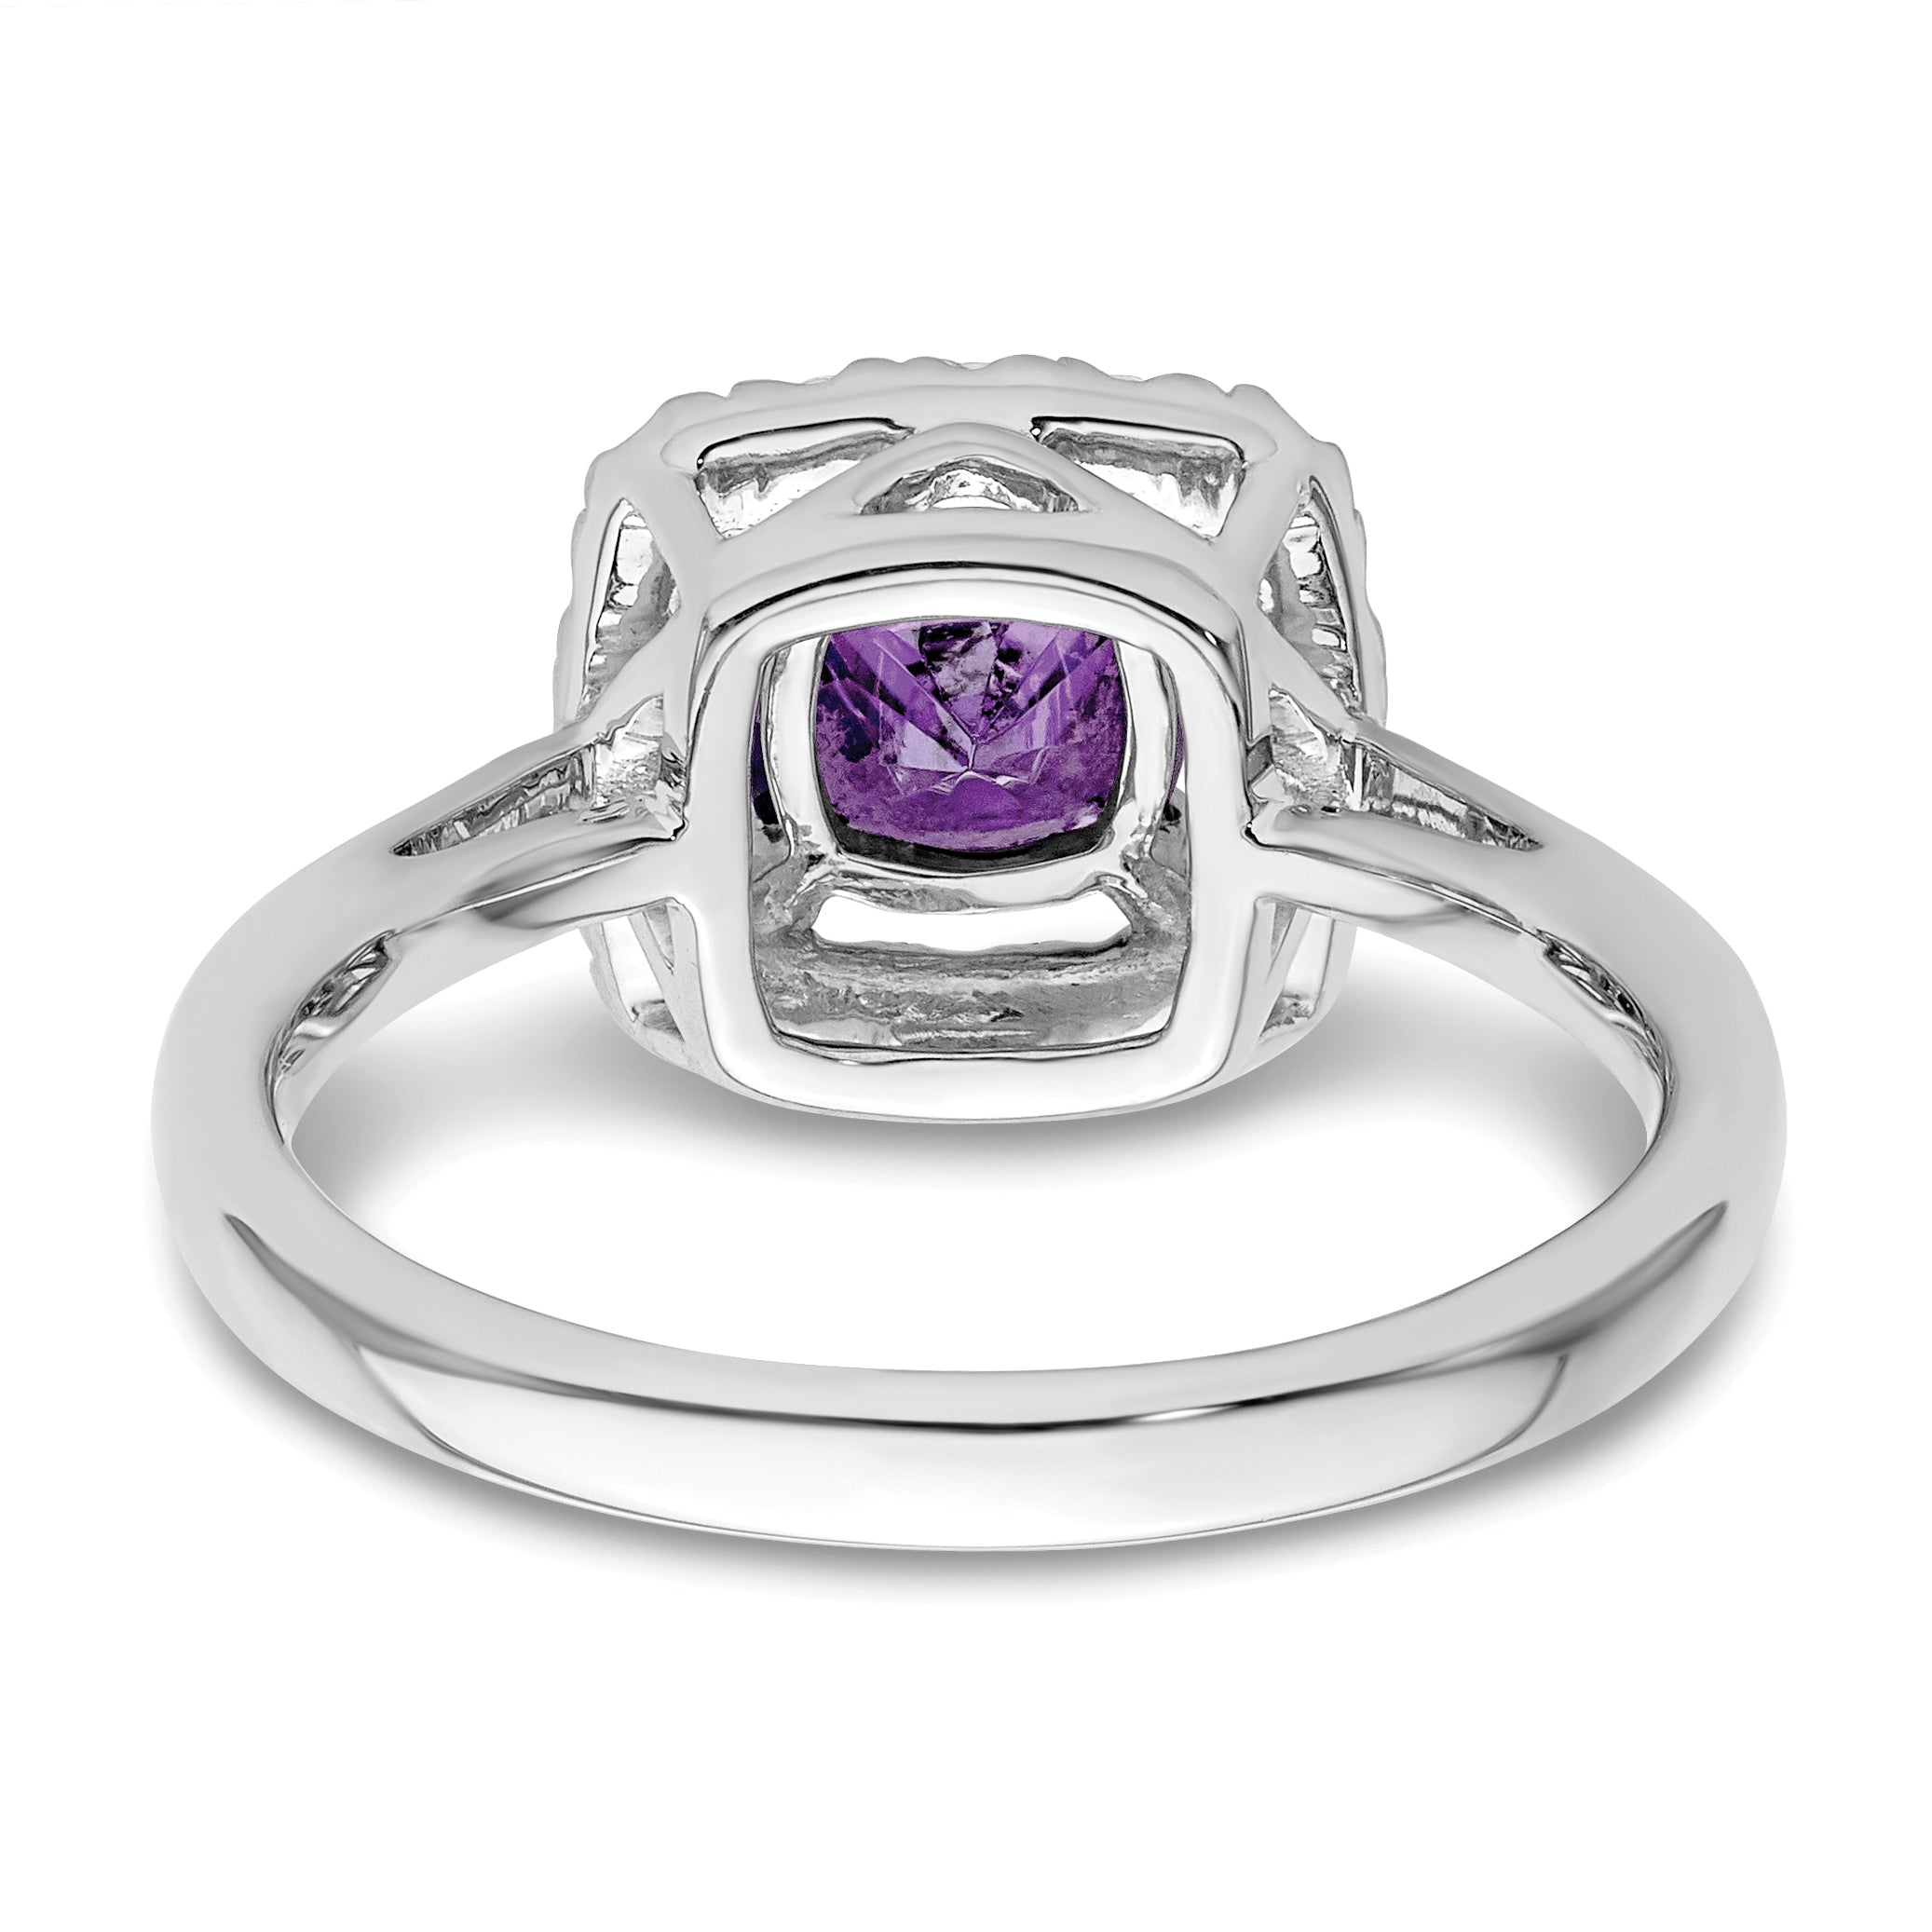 14K White Gold Lab Grown Diamond and Amethyst Halo Ring